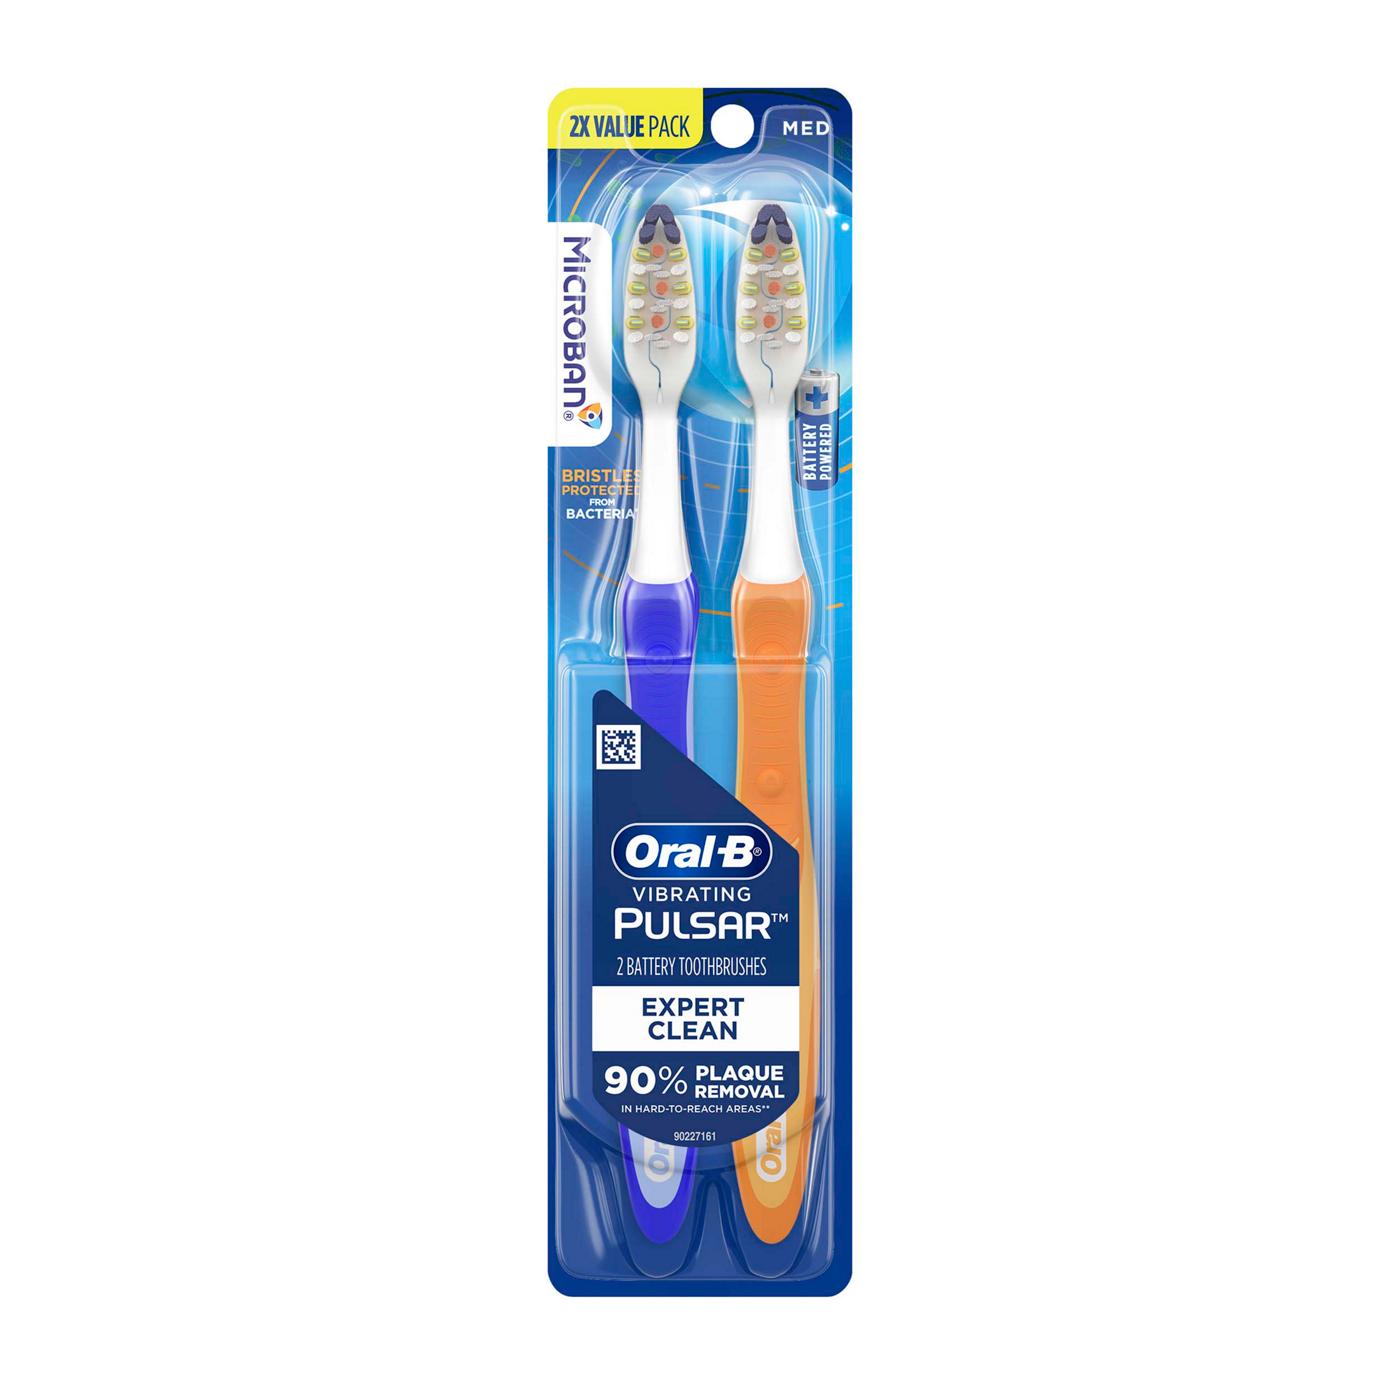 Oral-B Pulsar Expert Clean Battery Toothbrushes Medium; image 1 of 2